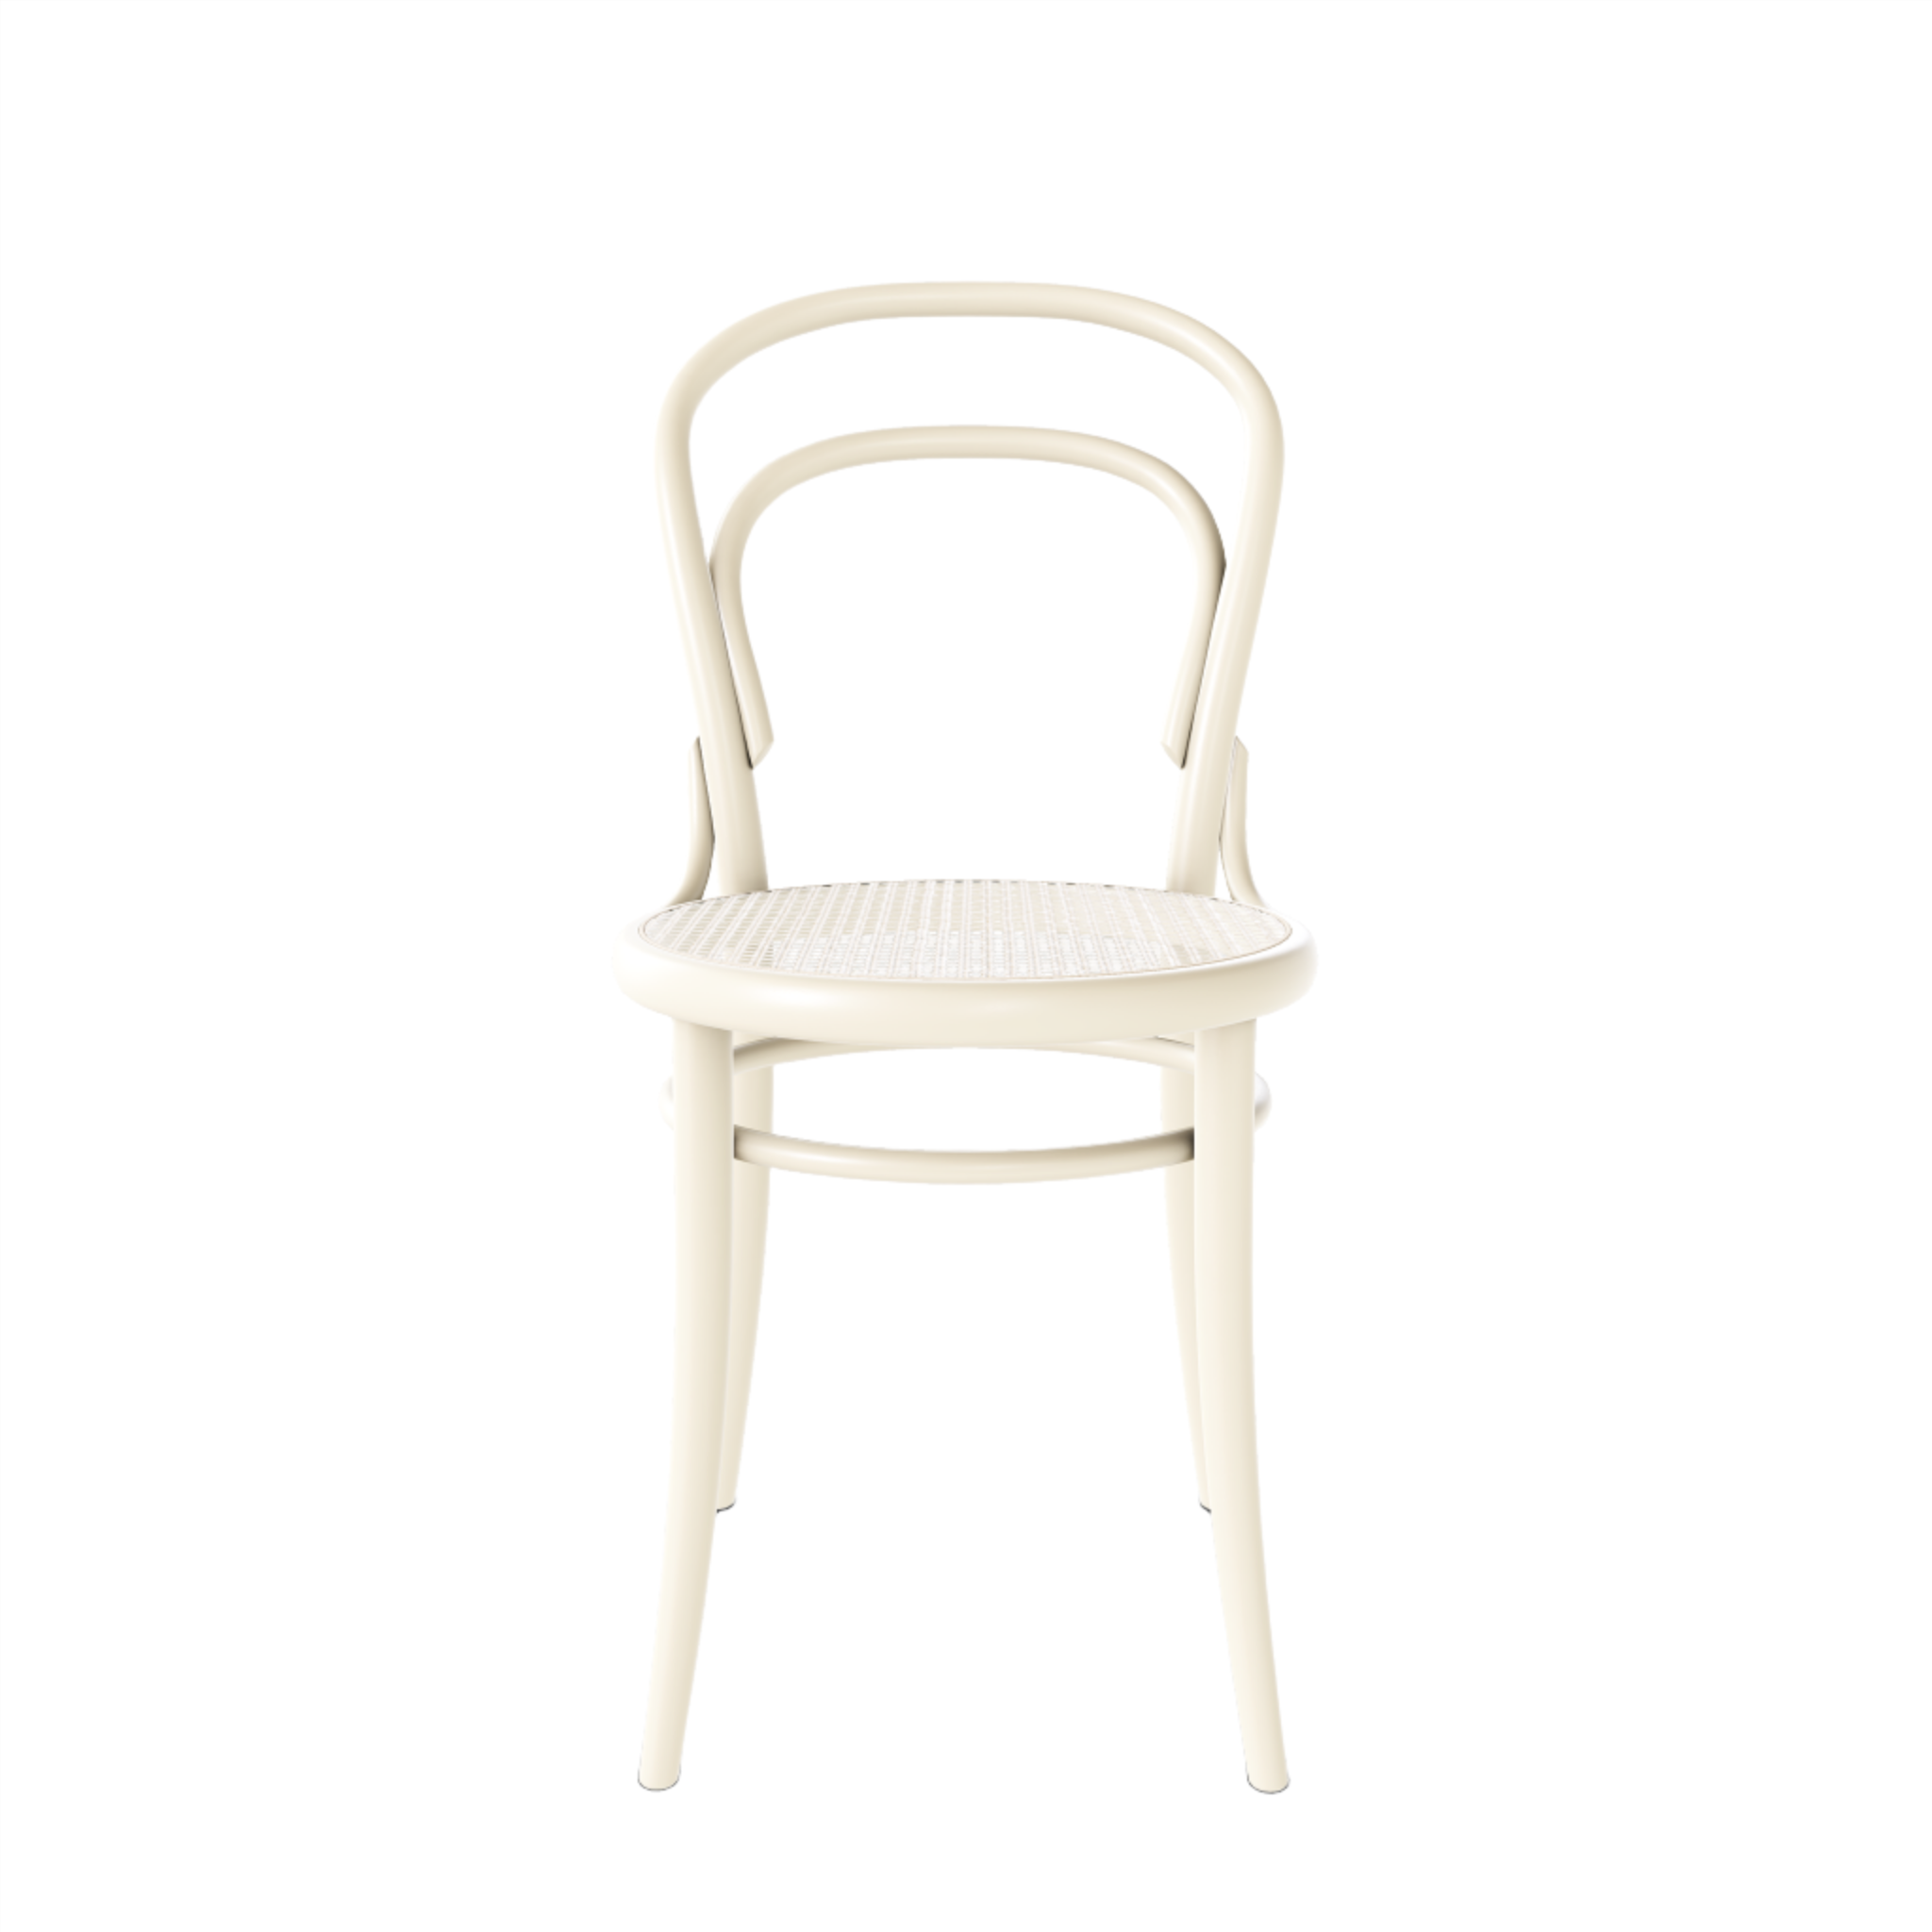 Ton 14 Dining Chair with cane seat in Mocca Beige